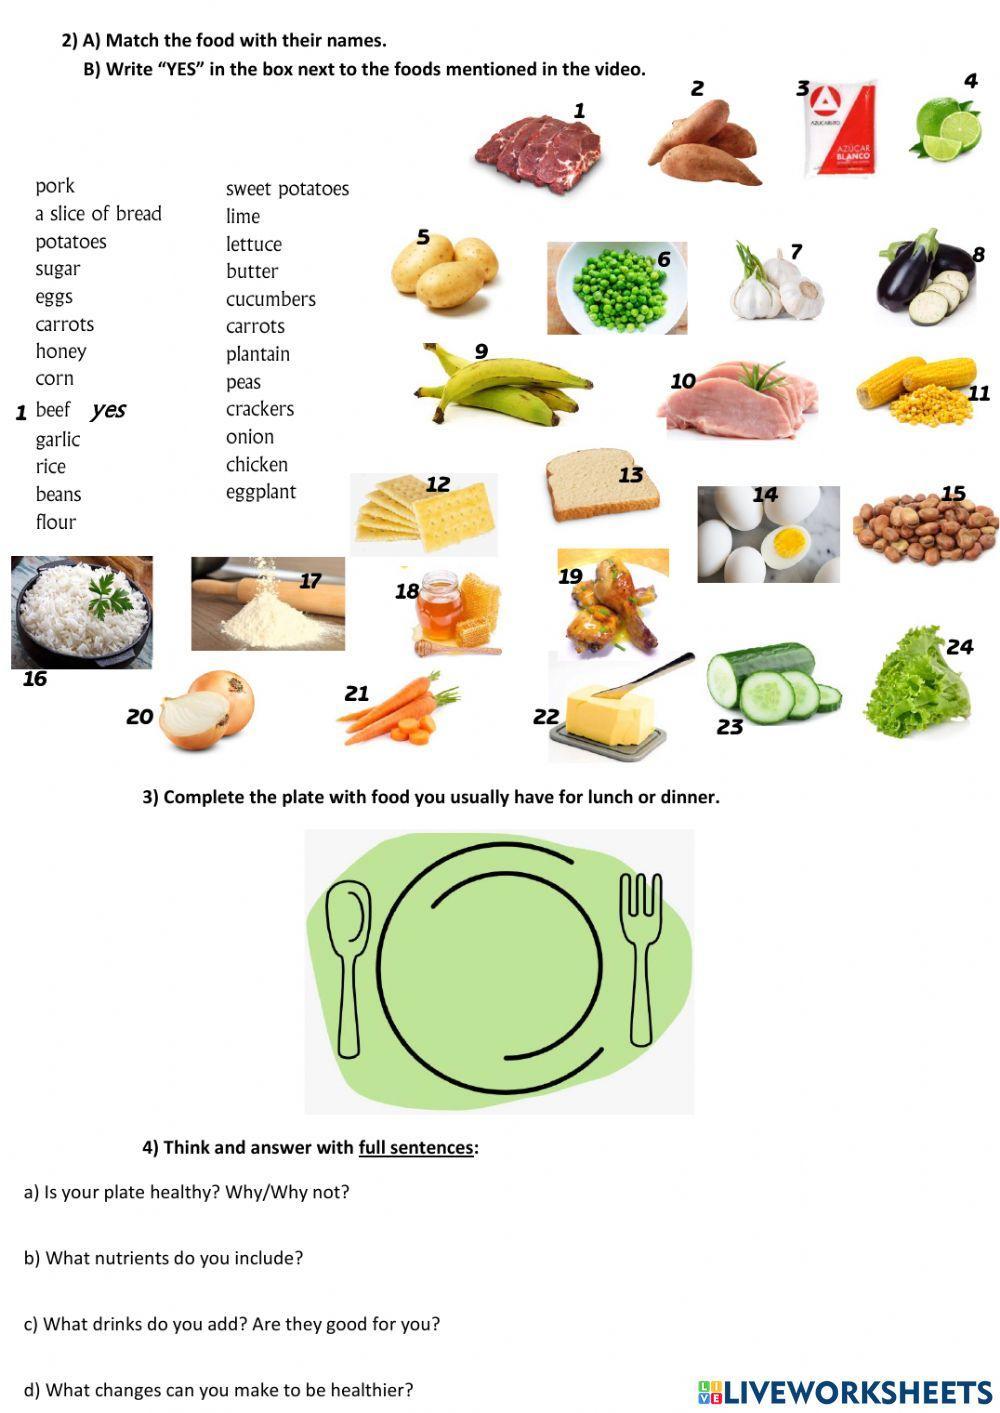 The healthy plate method